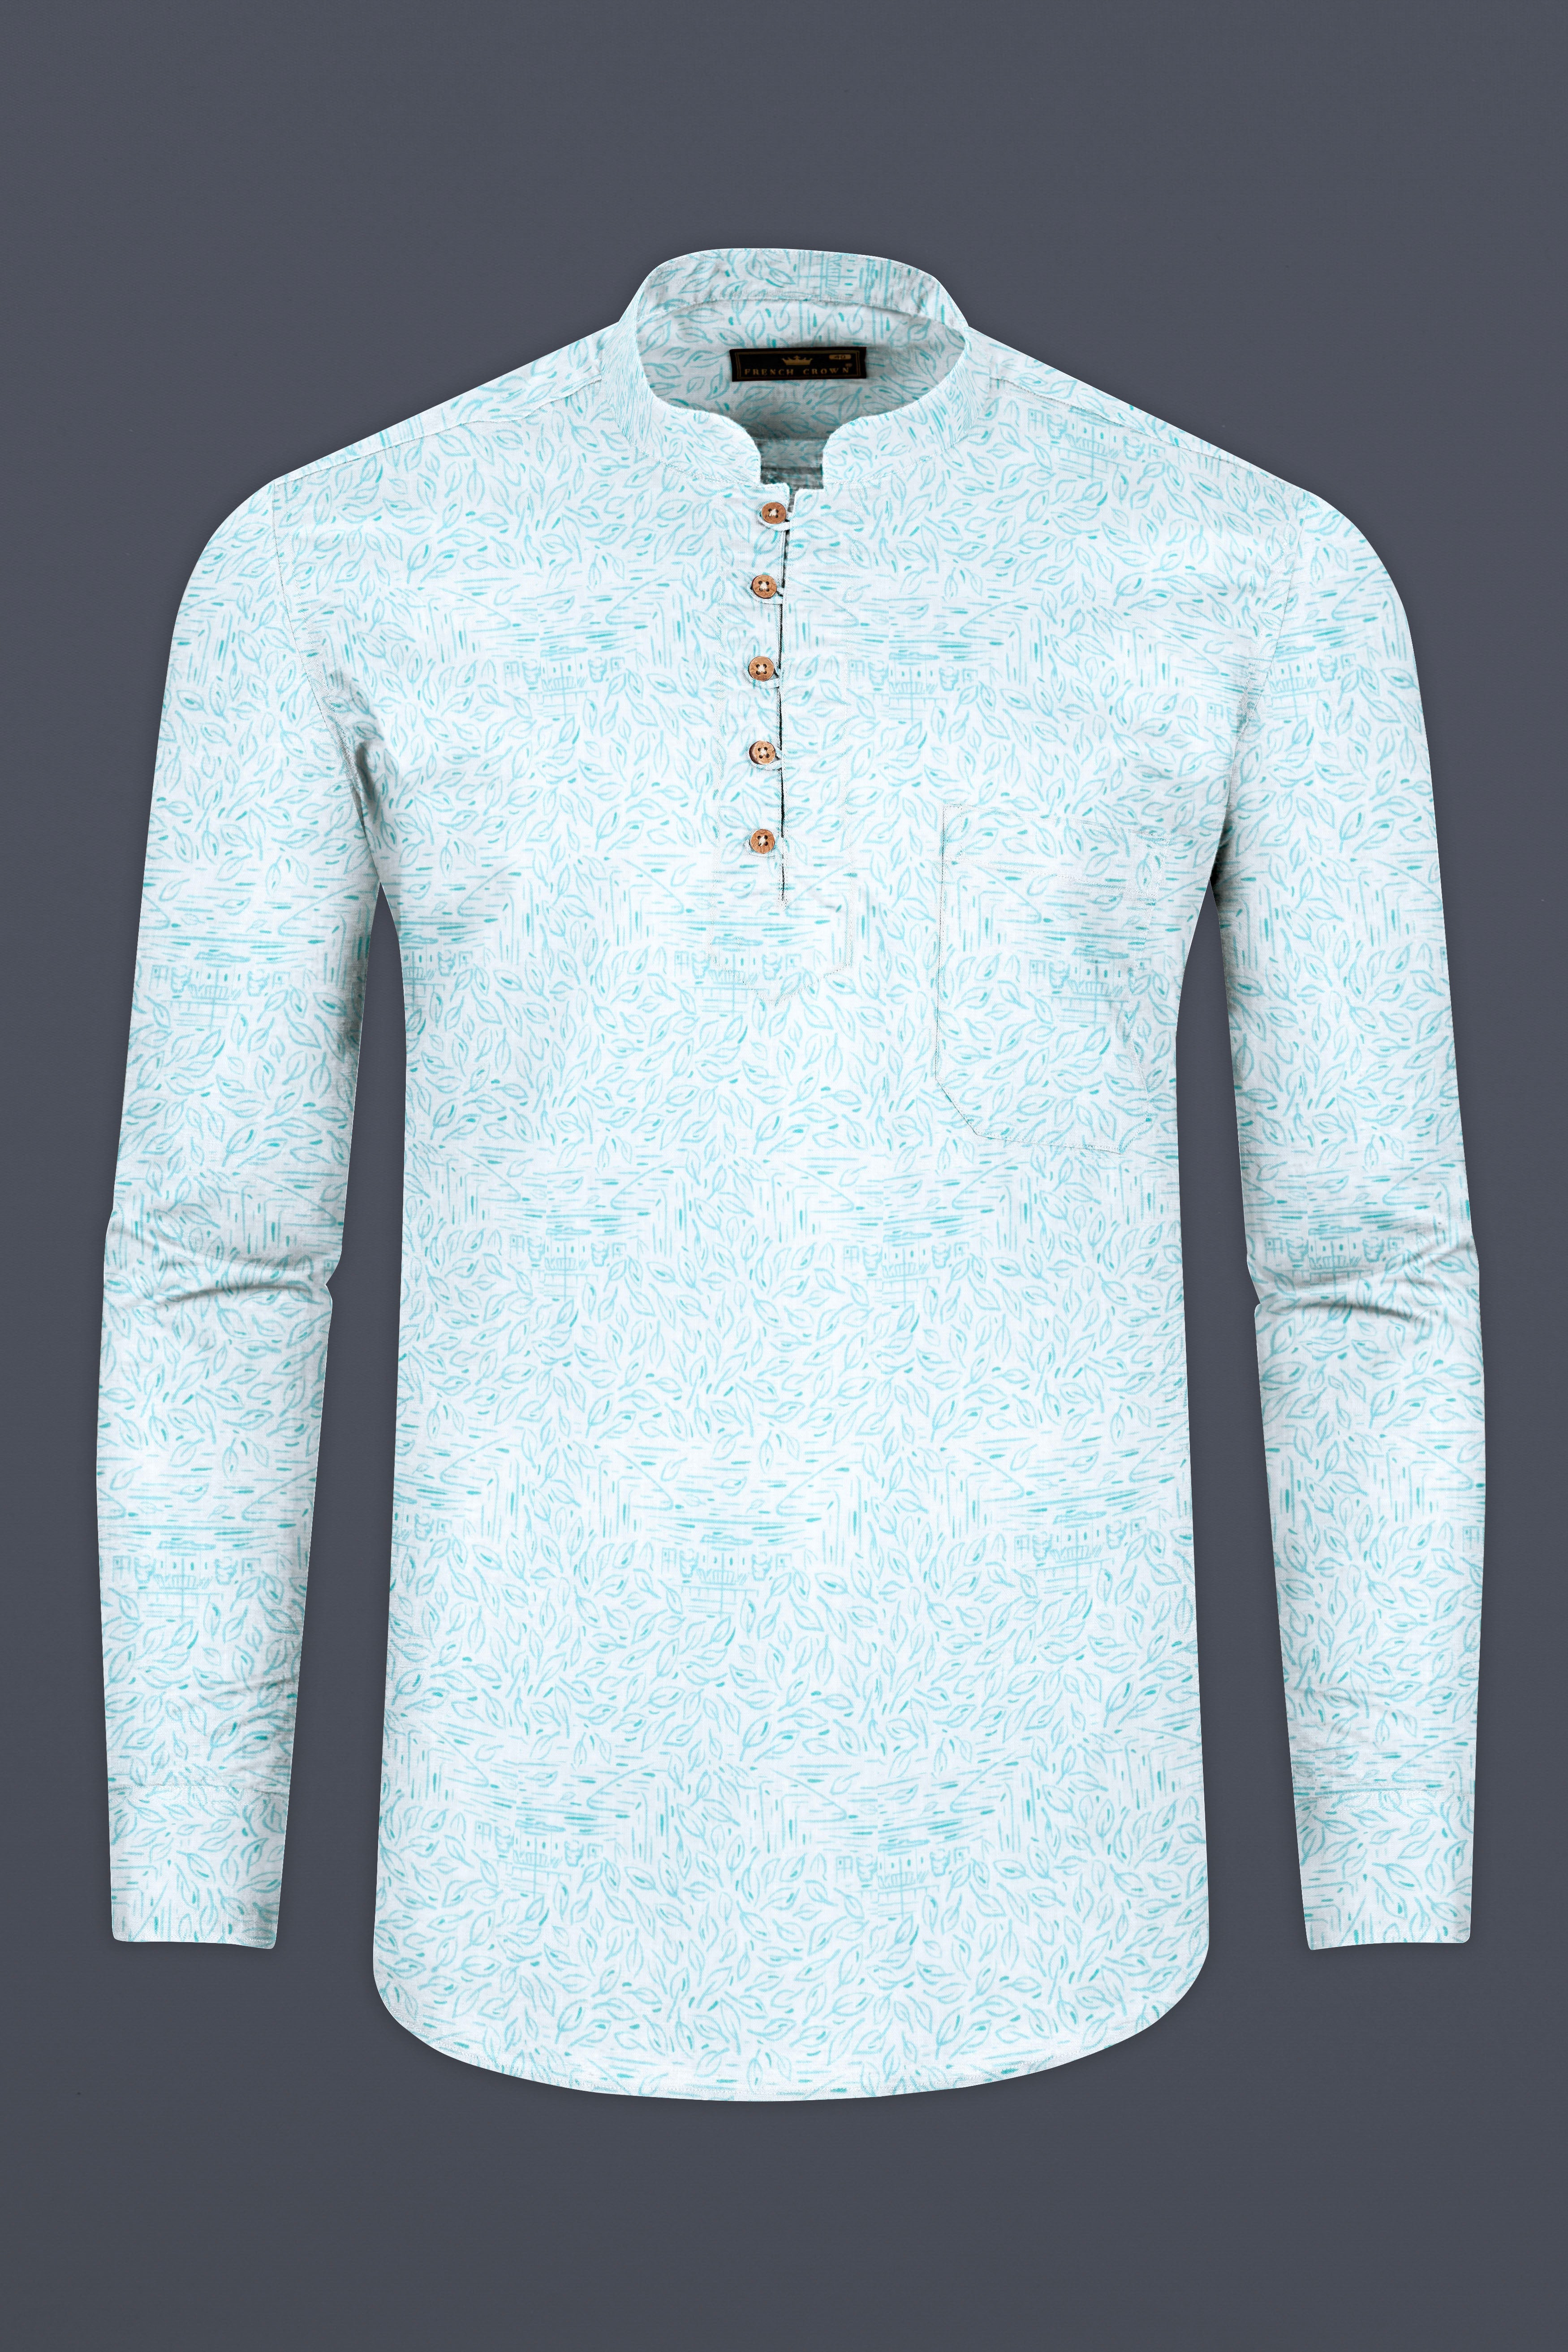 Bright White with jagged Ice Blue Leaf Printed Chambray Shirt